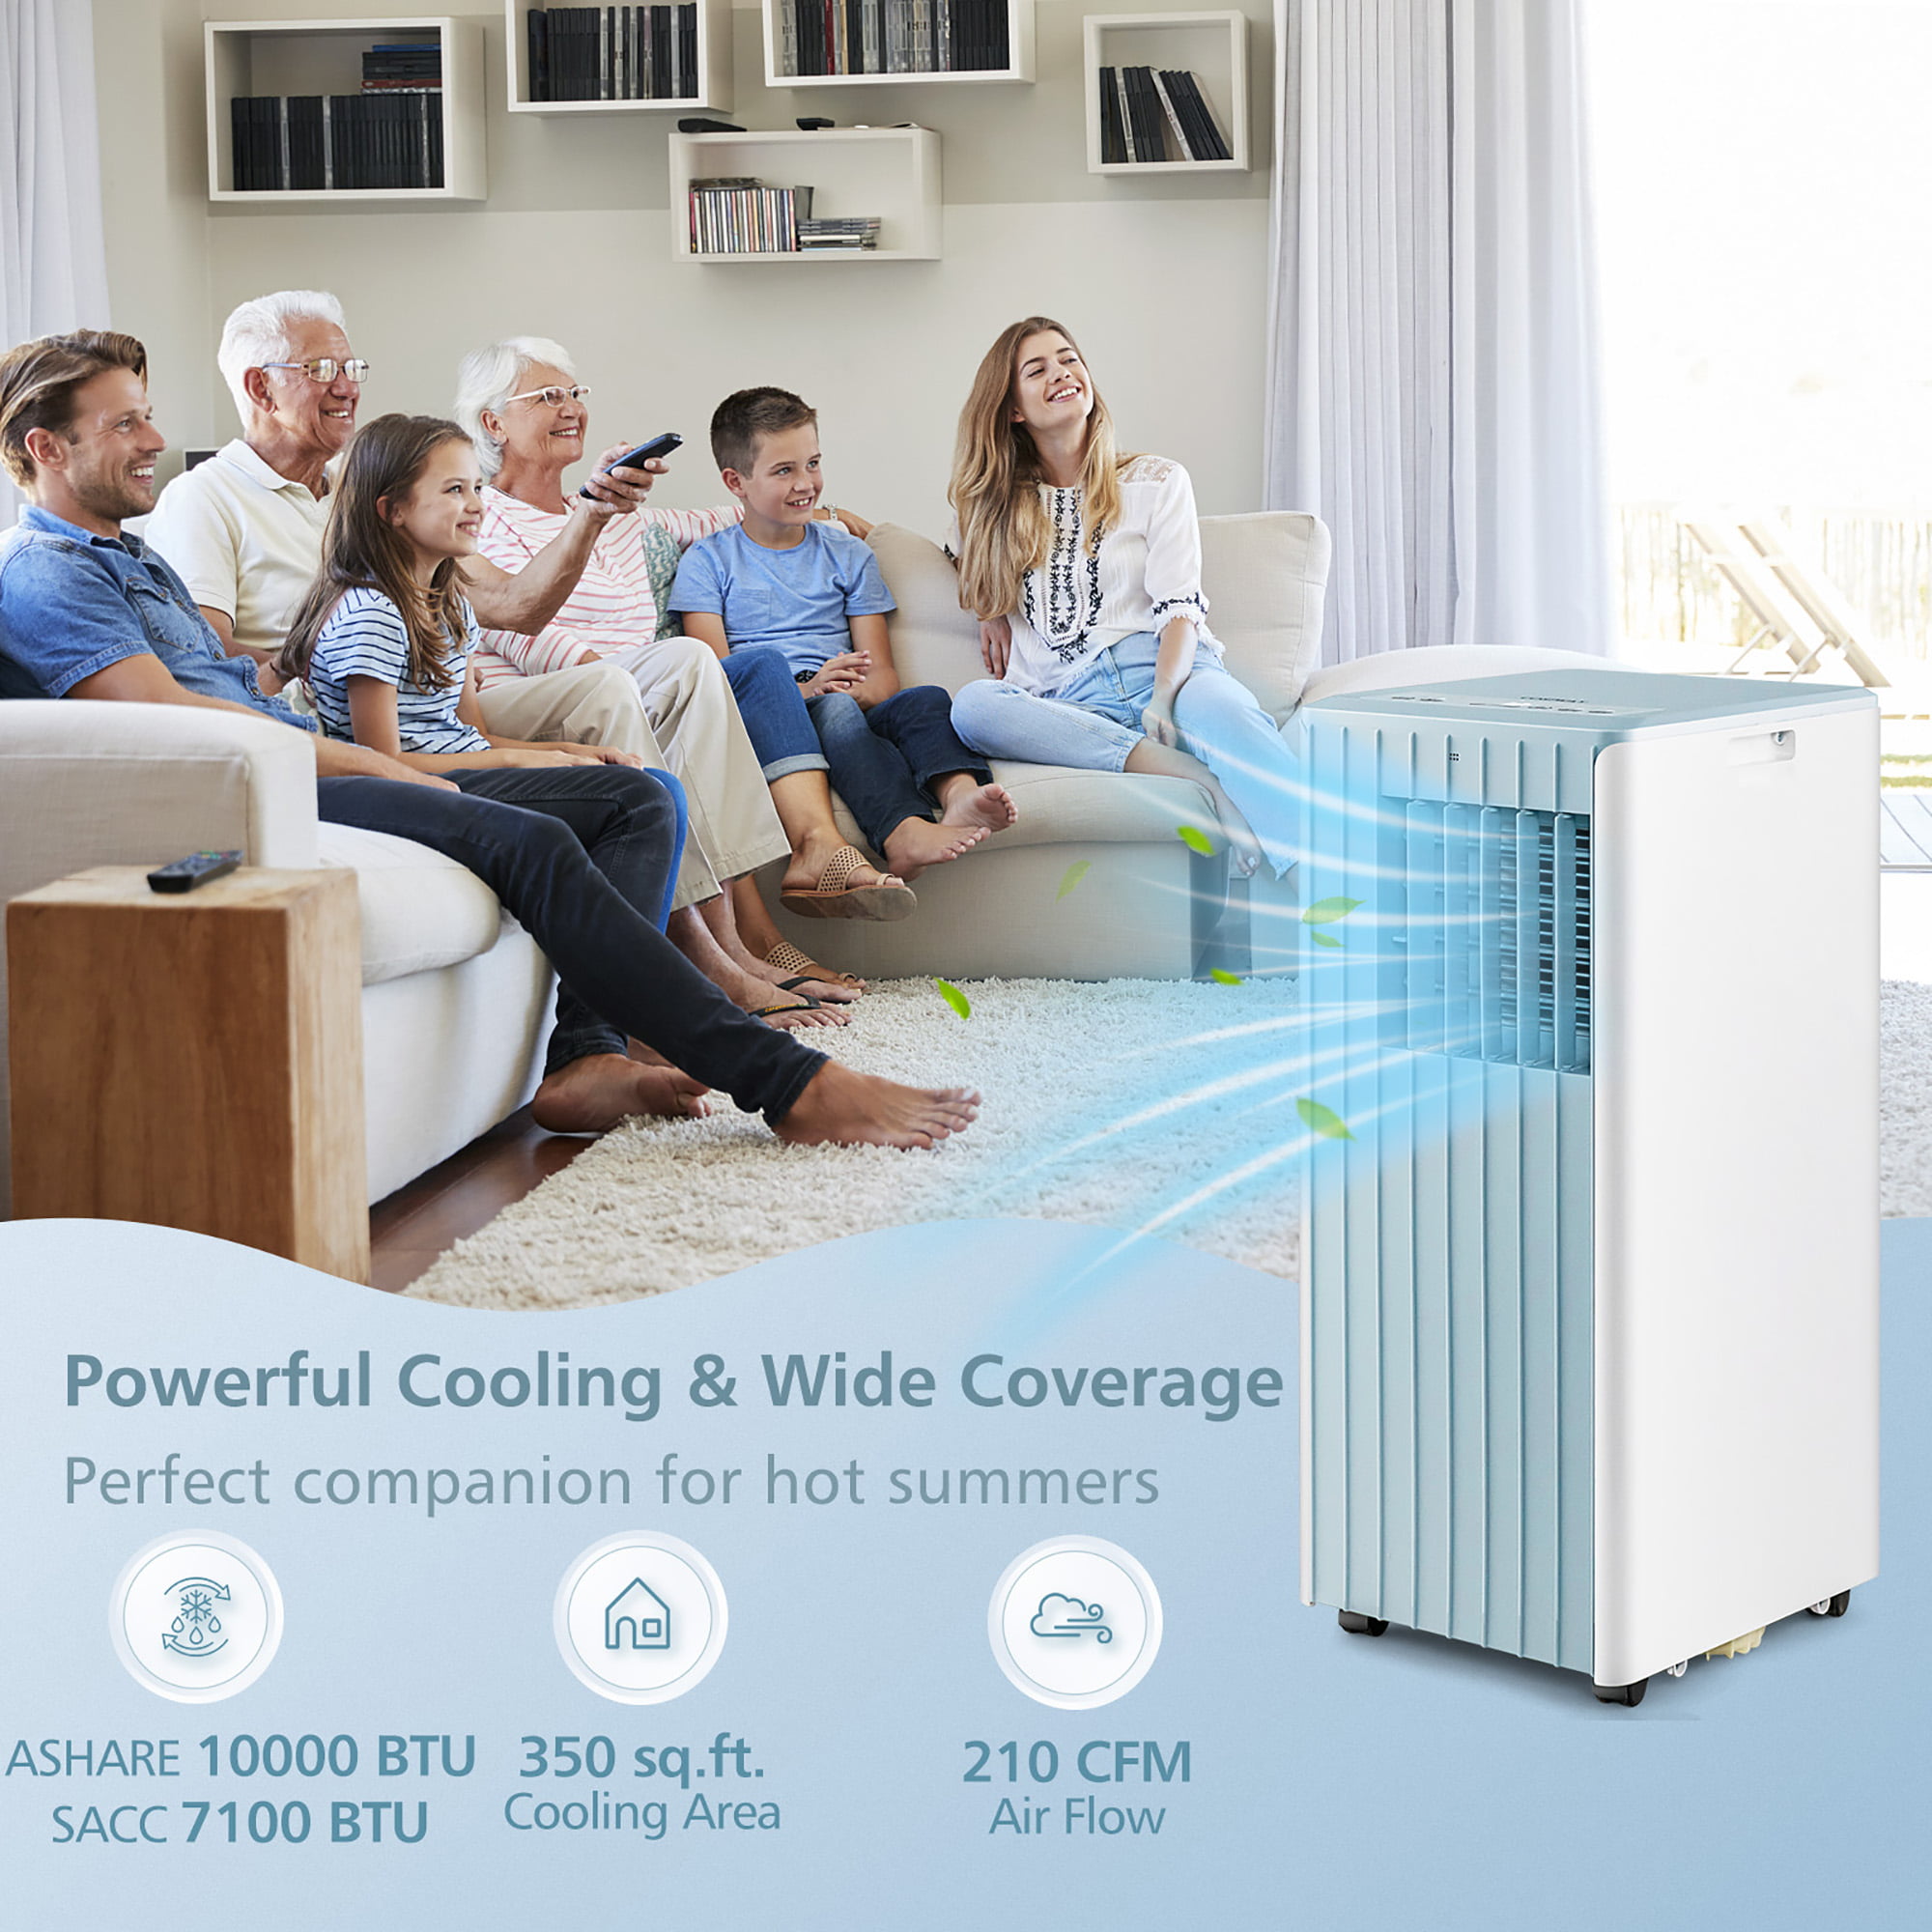  TURBRO Finnmark 10,000 BTU Portable Air Conditioner,  Dehumidifier and Fan, 3-in-1 Floor AC Unit for Rooms up to 400 Sq Ft, Sleep  Mode, Timer, Remote Included (6,000 BTU SACC) : Home & Kitchen